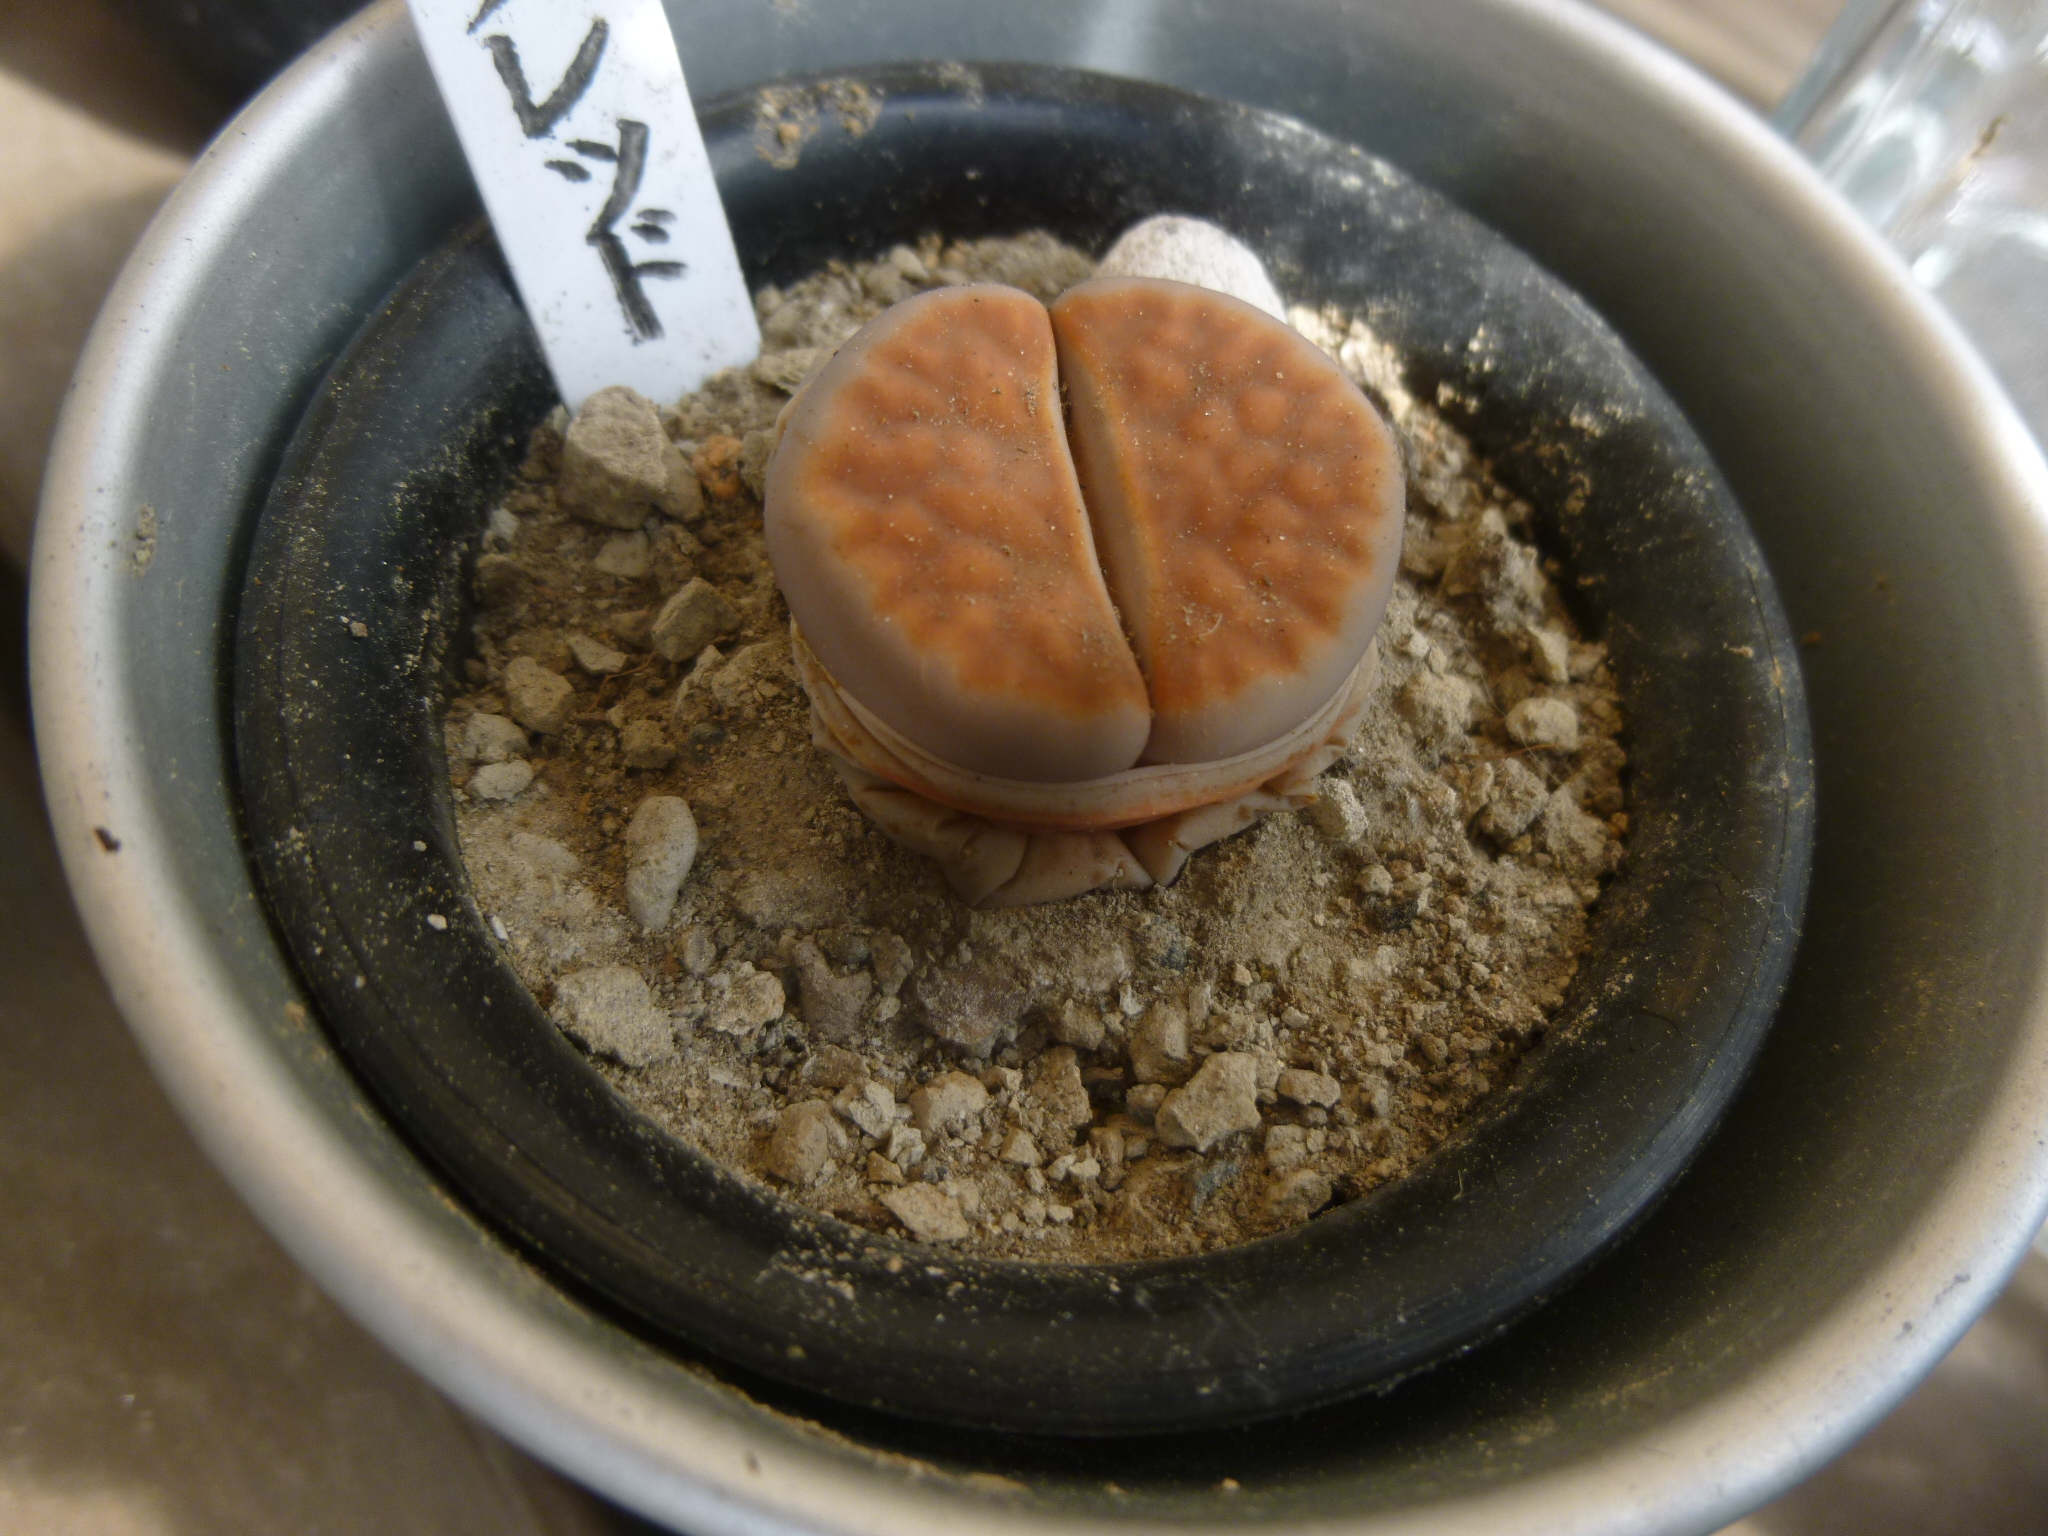 http://hungtime-times.com/hung_time_writers/entry_img/lithops1405%20%282%29.JPG